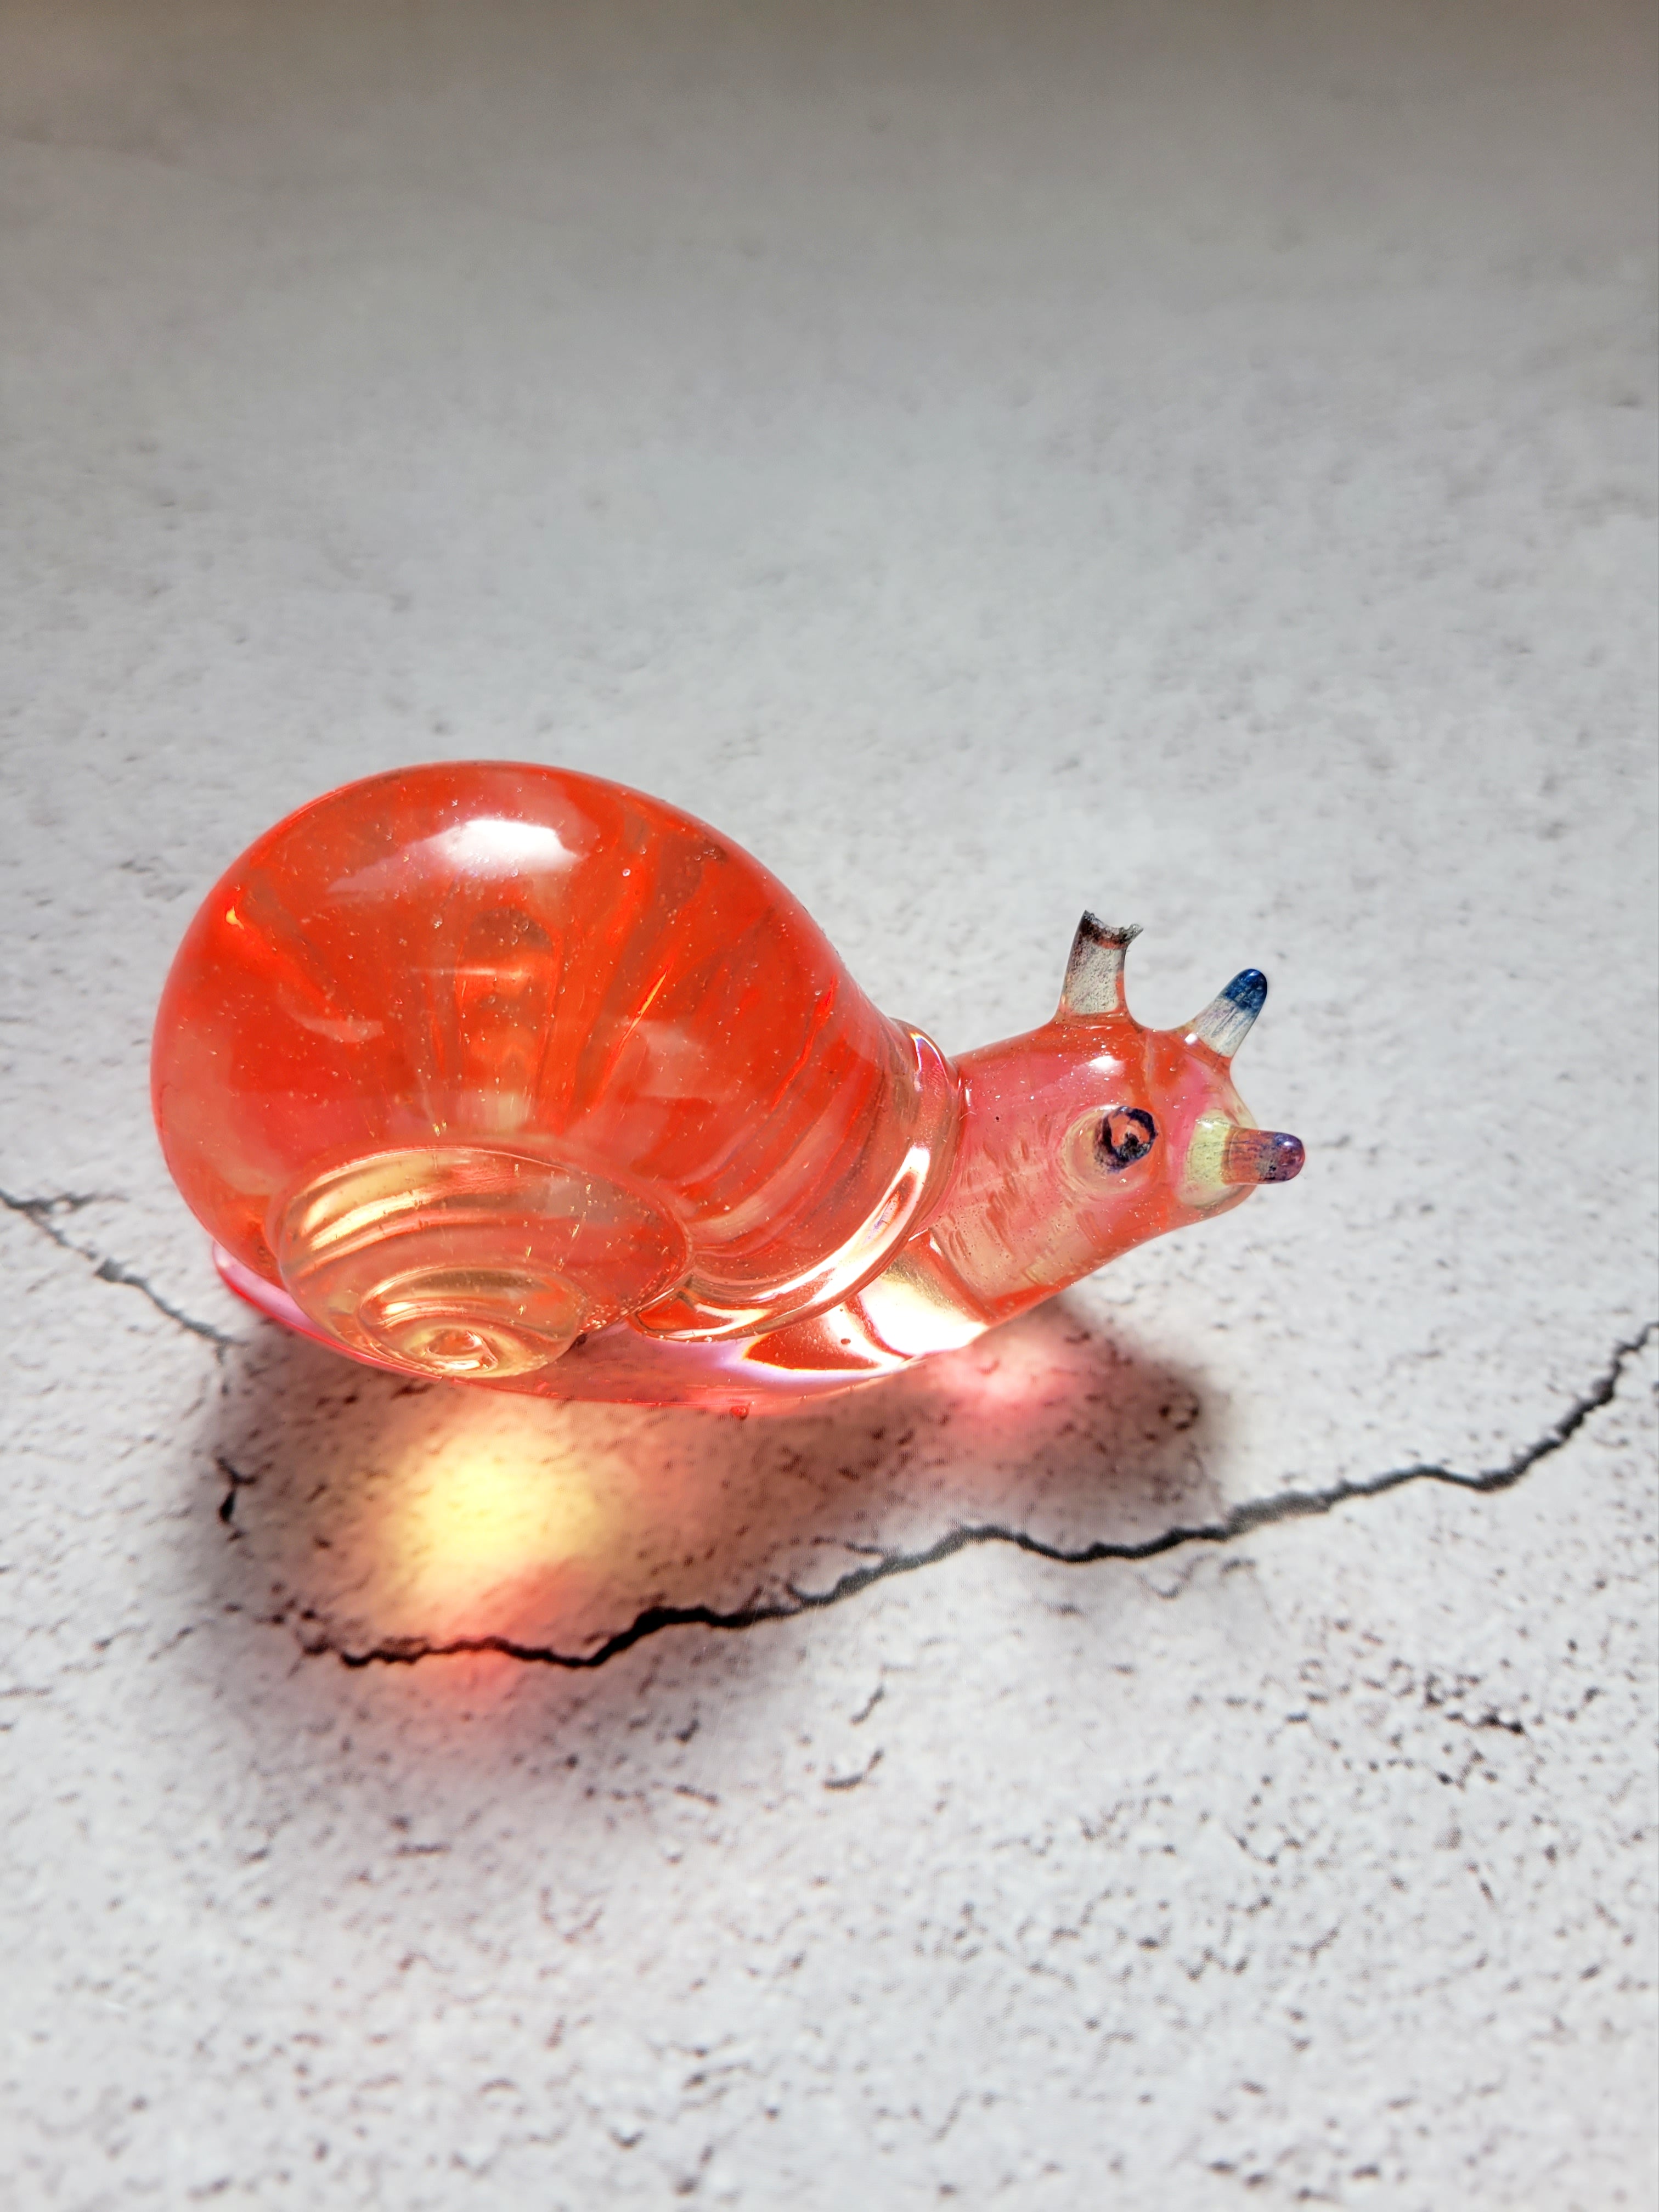 a resin made snail, side view. a clear yellow and orange swirl coloring with blue topped antennae